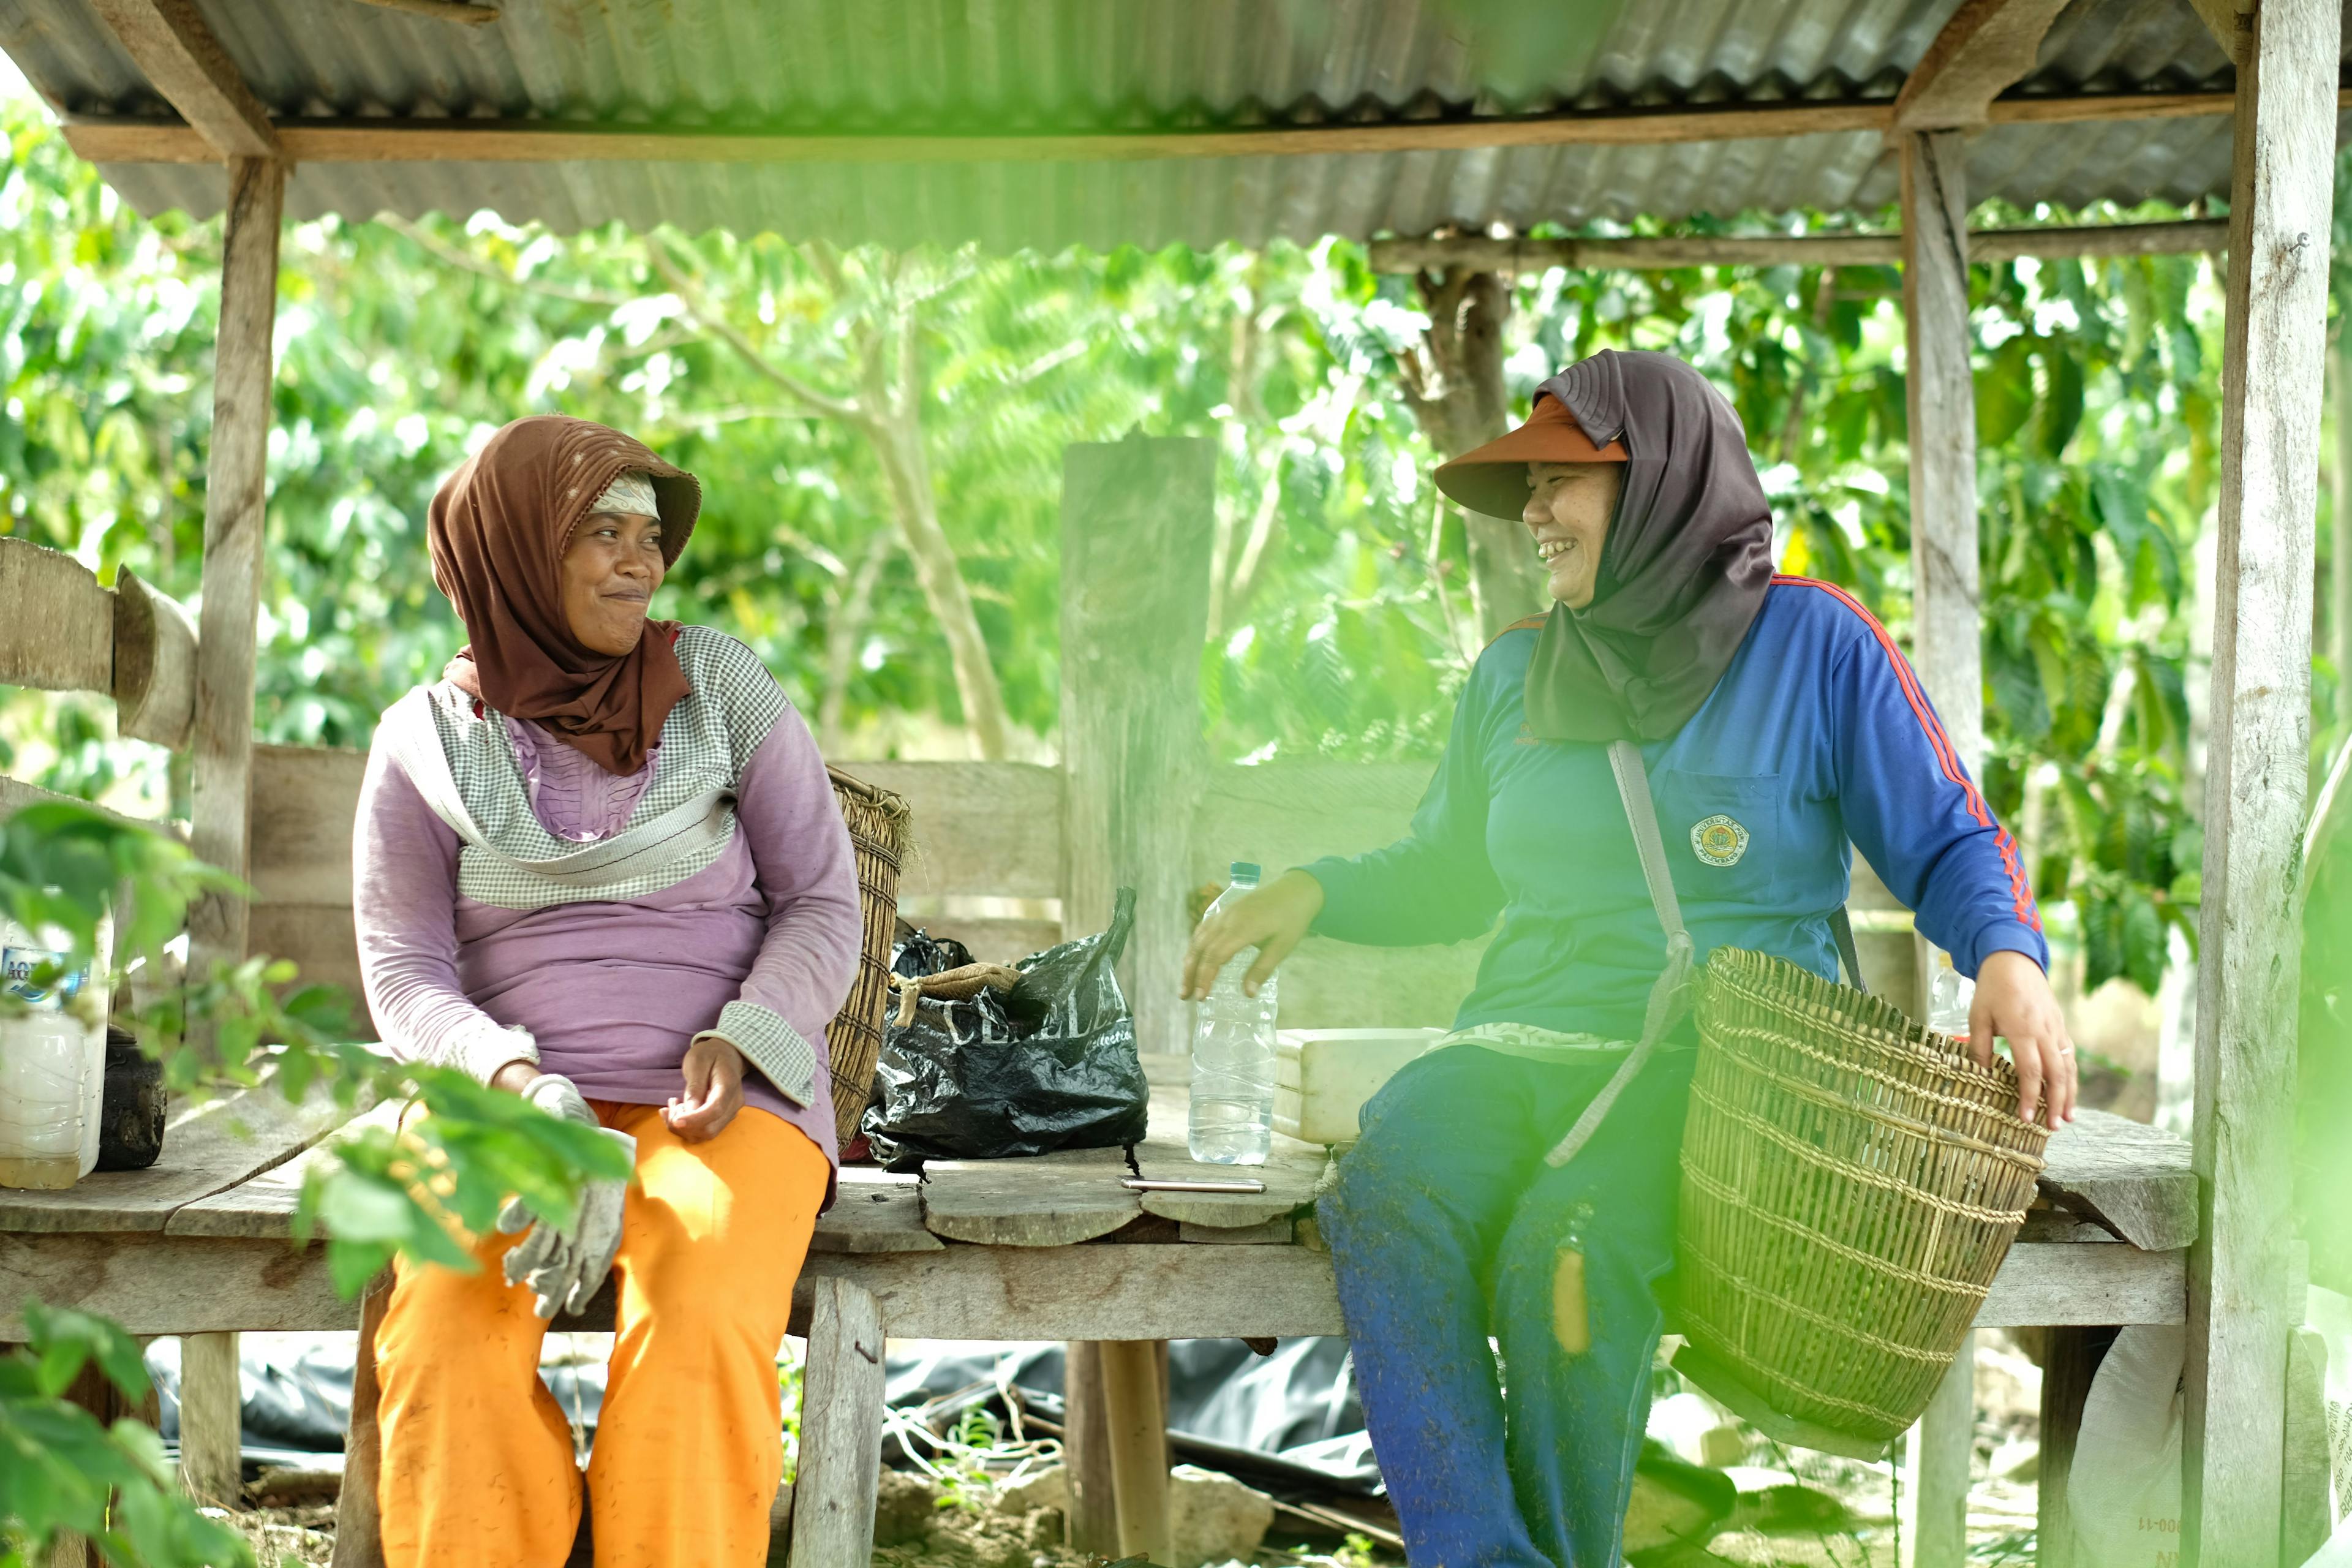 Women taking a chat during farmwork in Indonesia